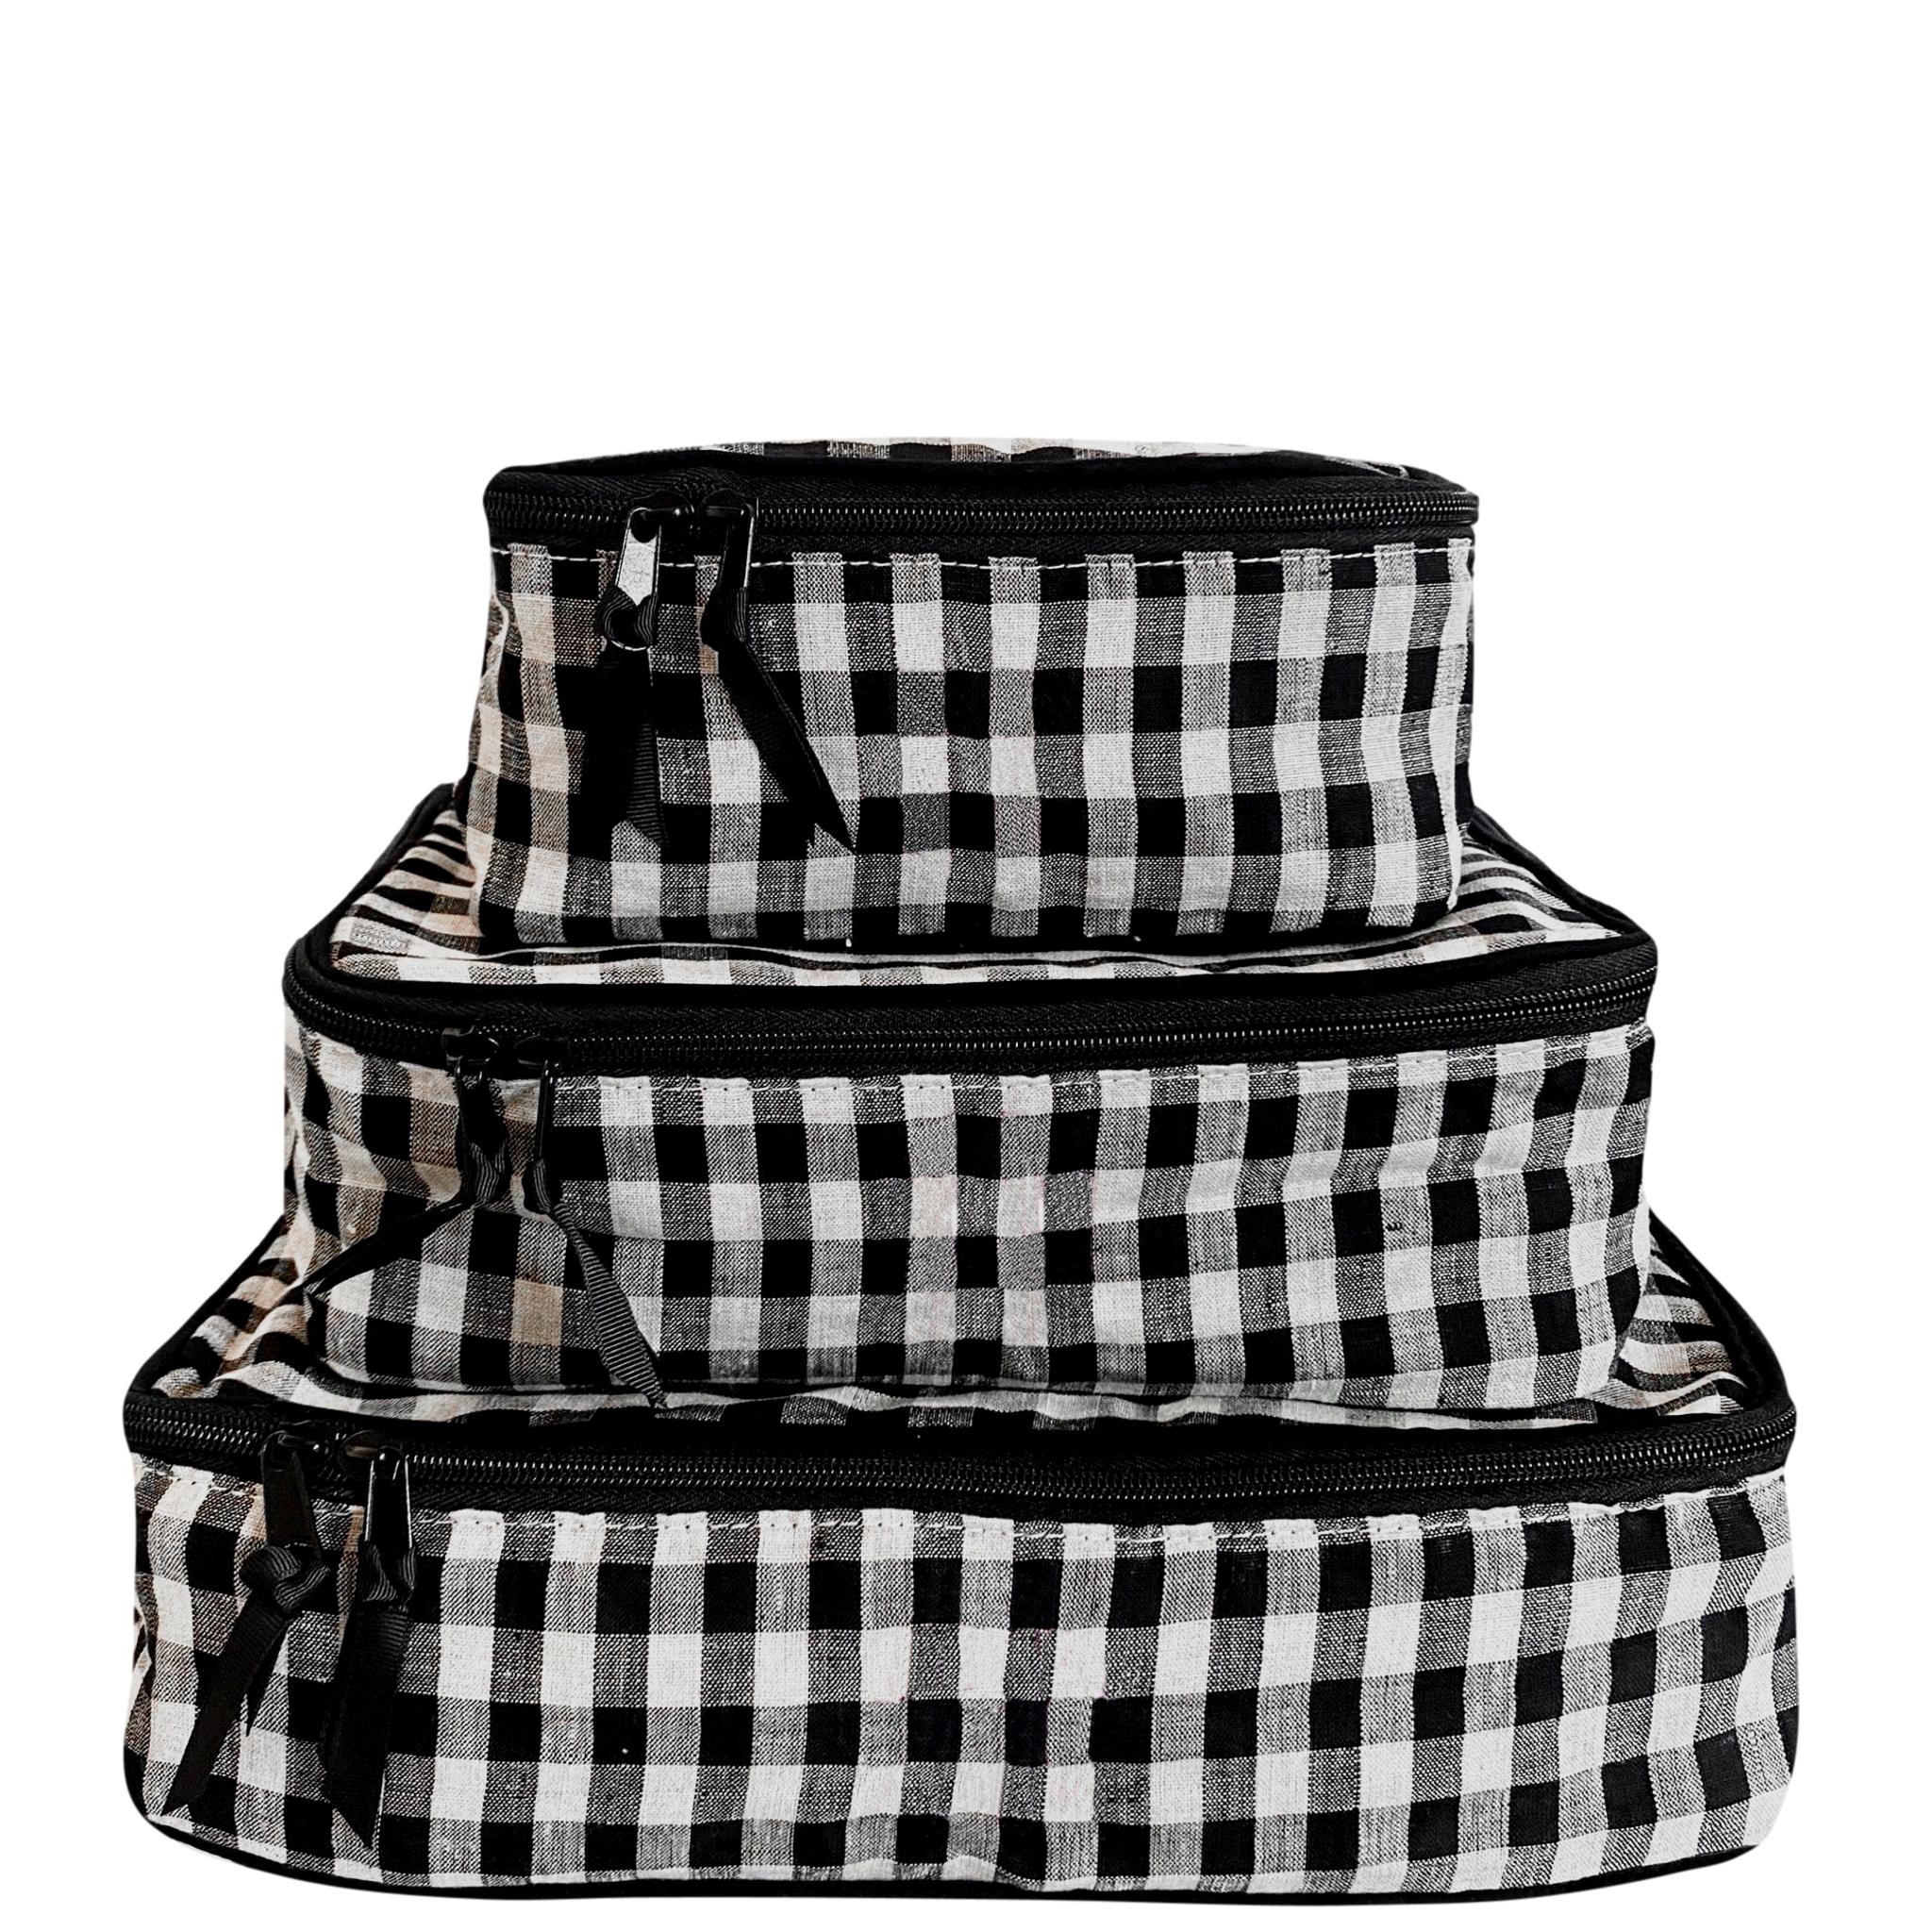 Linen Packing Cubes, 3-pack Gingham